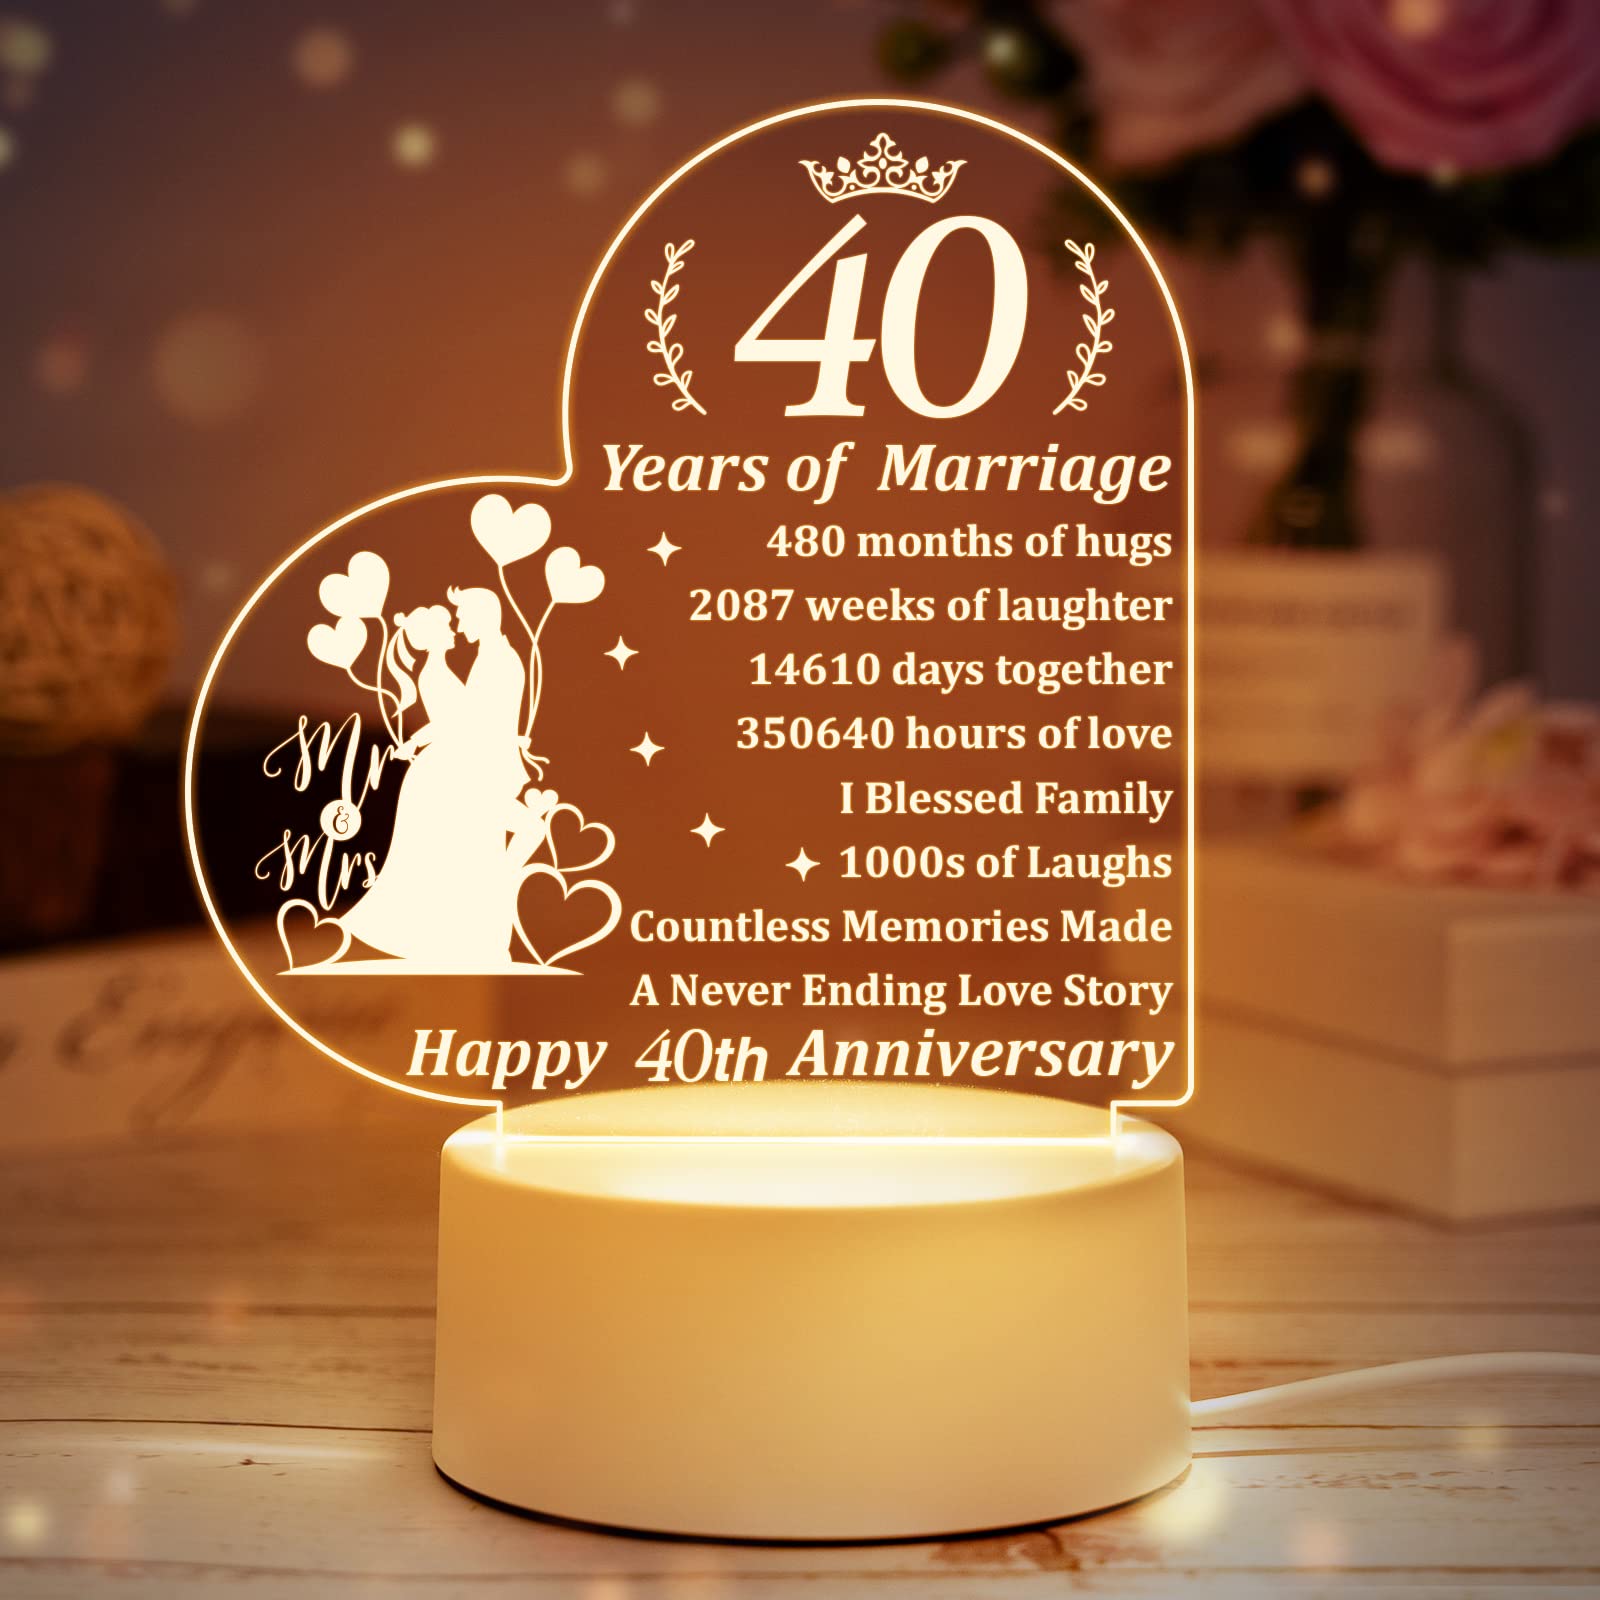 Amazon.com - SUNBMO 50th Anniversary Picture Frame, 50th Wedding Anniversary  Present for Parents, Gifts for Husband Wife 50th Anniversary, Golden  Anniversary Decorations for Mom and Dad